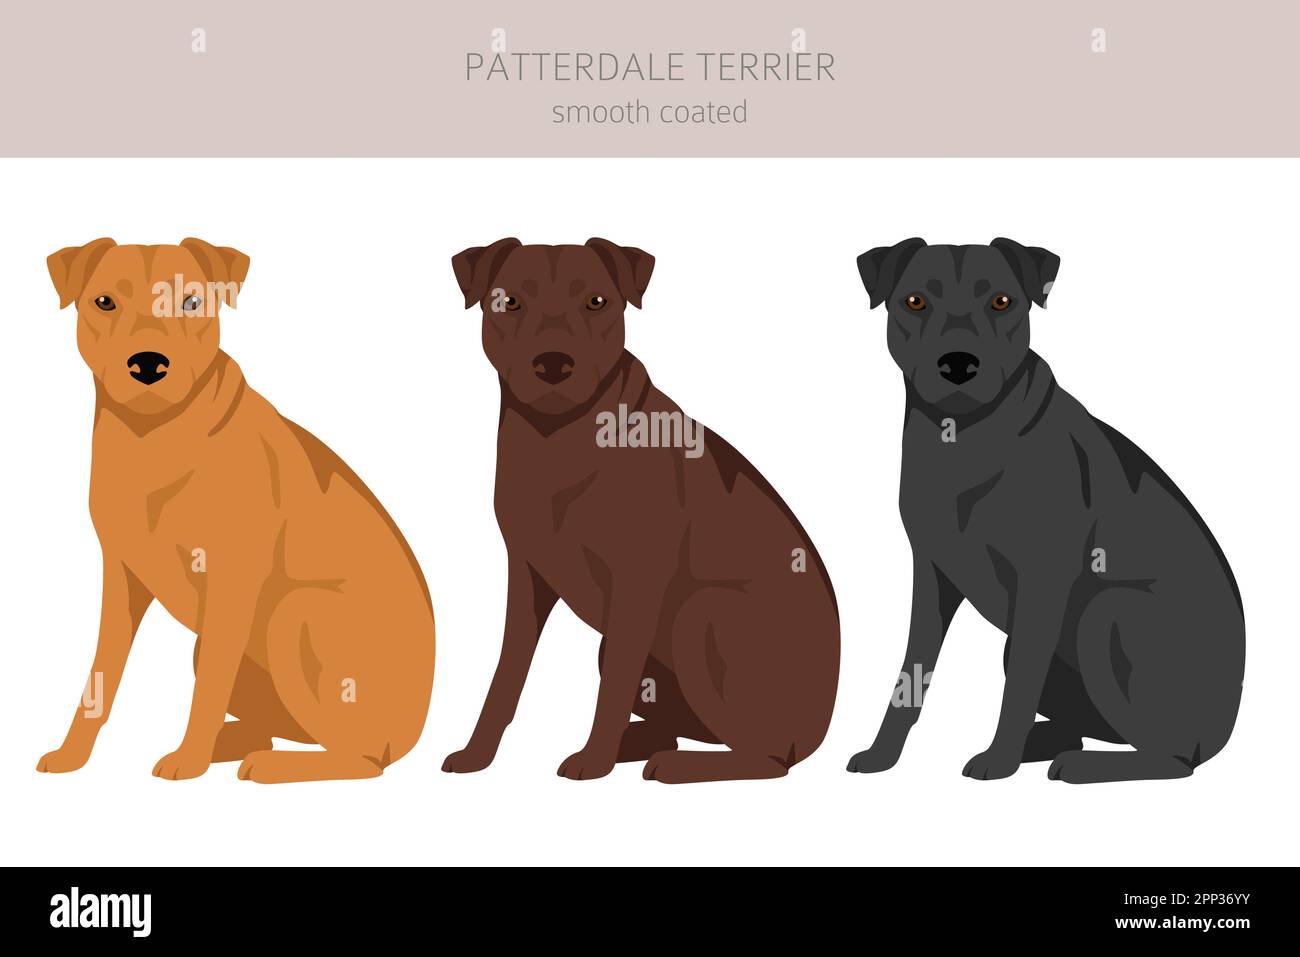 Patterdale terrier smooth coated clipart. All coat colors set.  All dog breeds characteristics infographic. Vector illustration Stock Vector